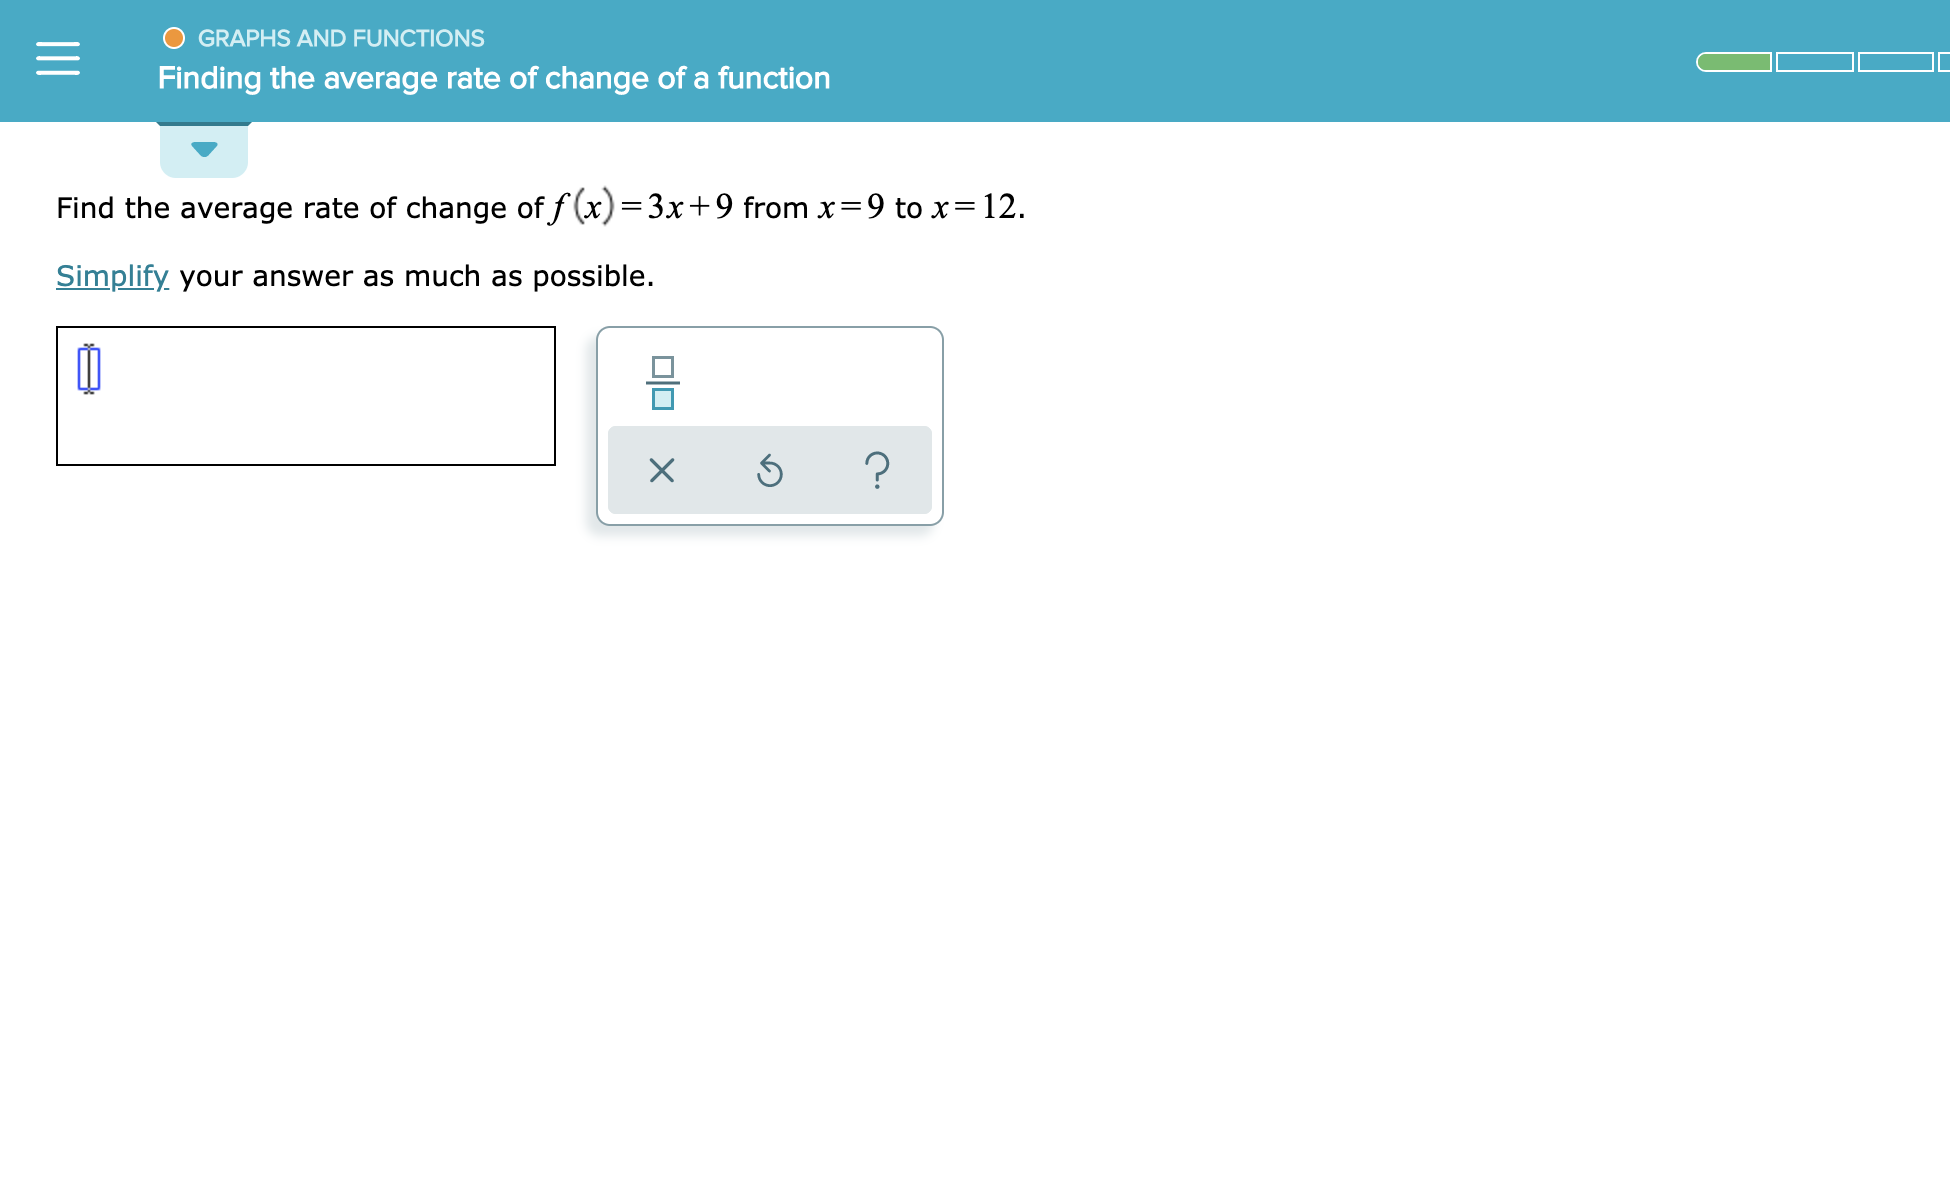 GRAPHS AND FUNCTIONS
Finding the average rate of change of a function
Find the average rate of change of f(x)=3x+9 from x=9 to x= 12
Simplify your answer as much as possible.
미미 x
